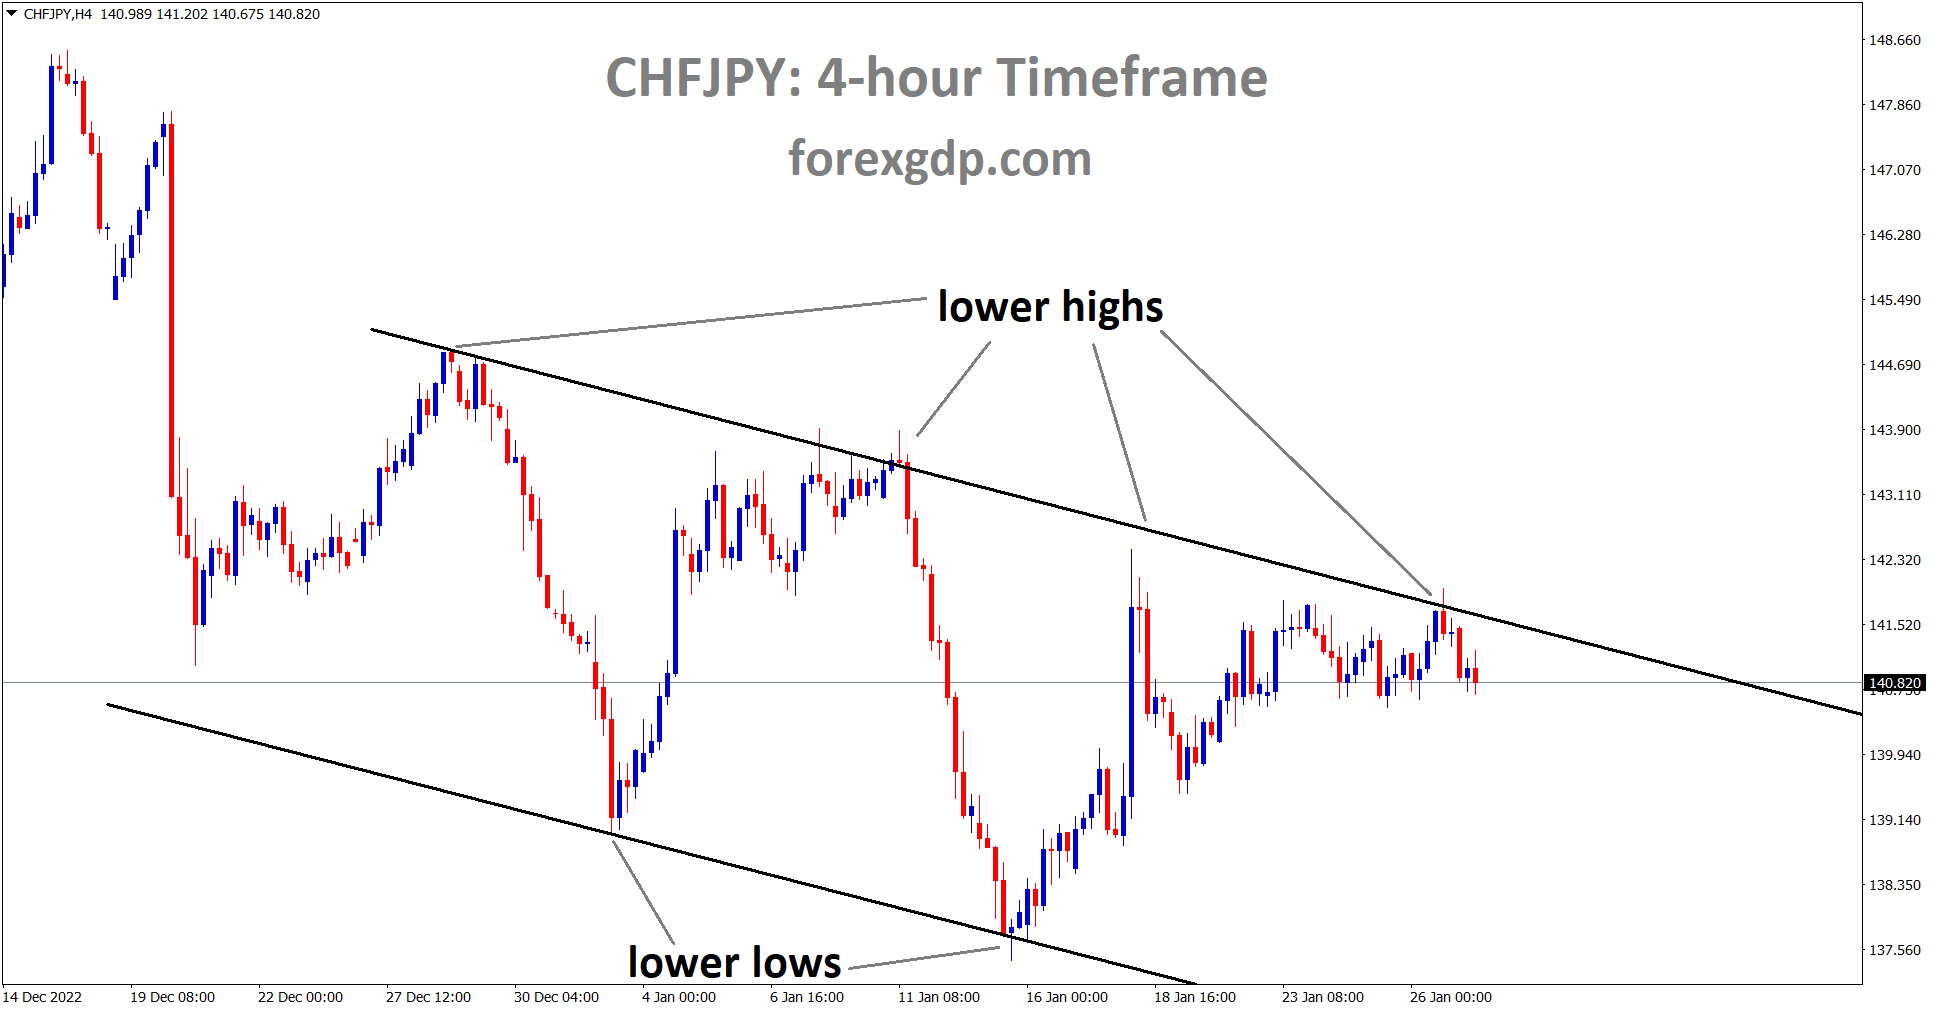 CHFJPY is moving in a Descending channel and the market has reached the lower high area of the channel.